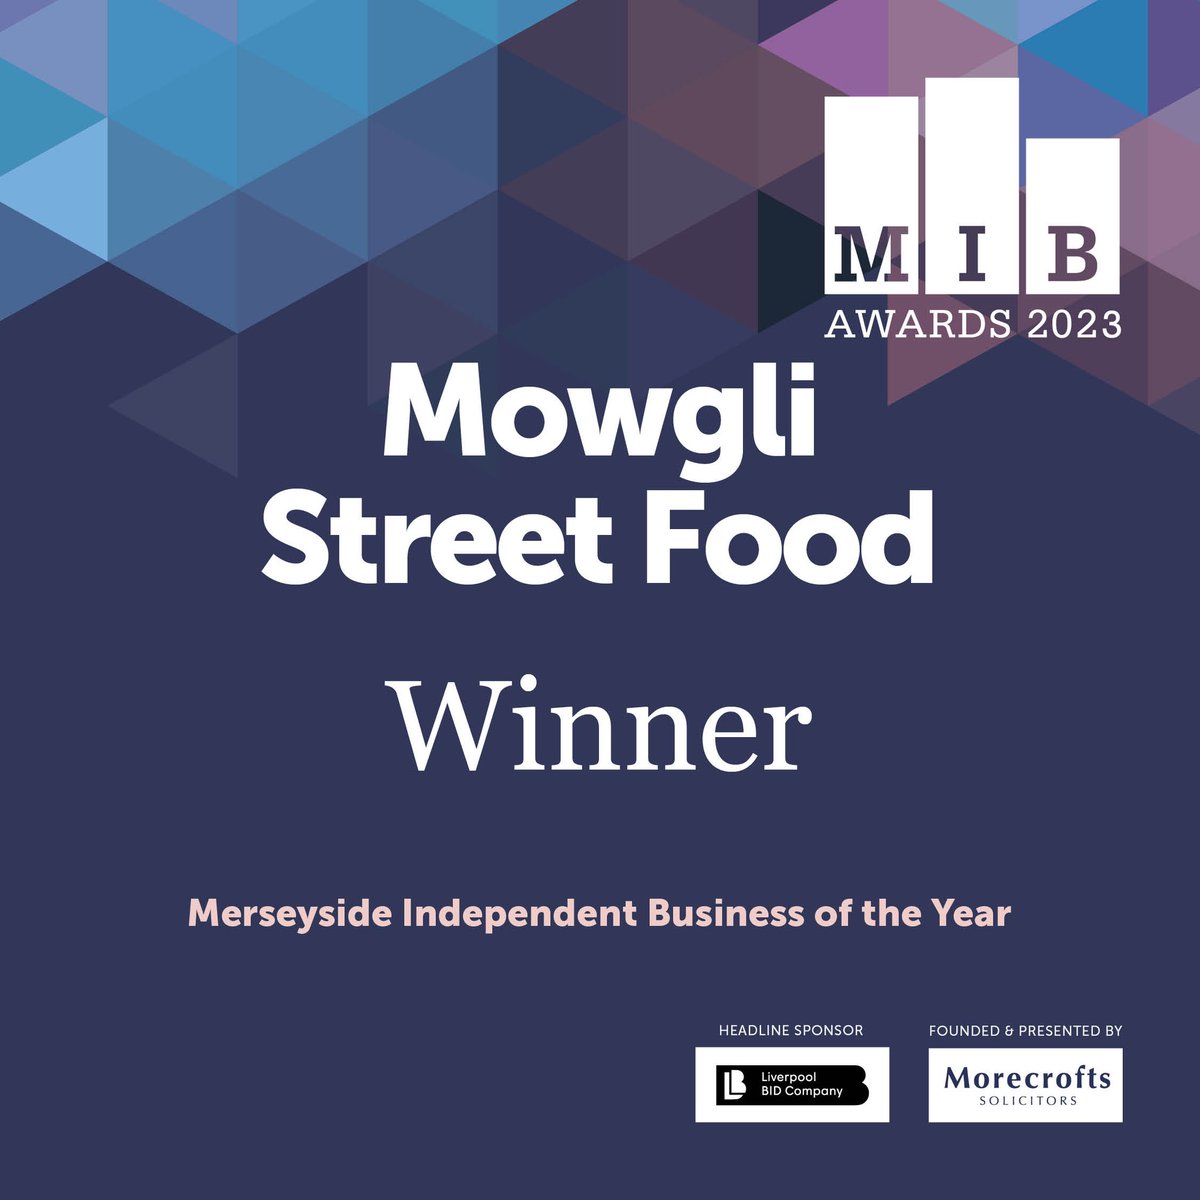 So, it’s time for our final award. The Merseyside Independent Business of the Year Award 2023 goes to…@MowgliStFood   #MIB23 #MIBWinners